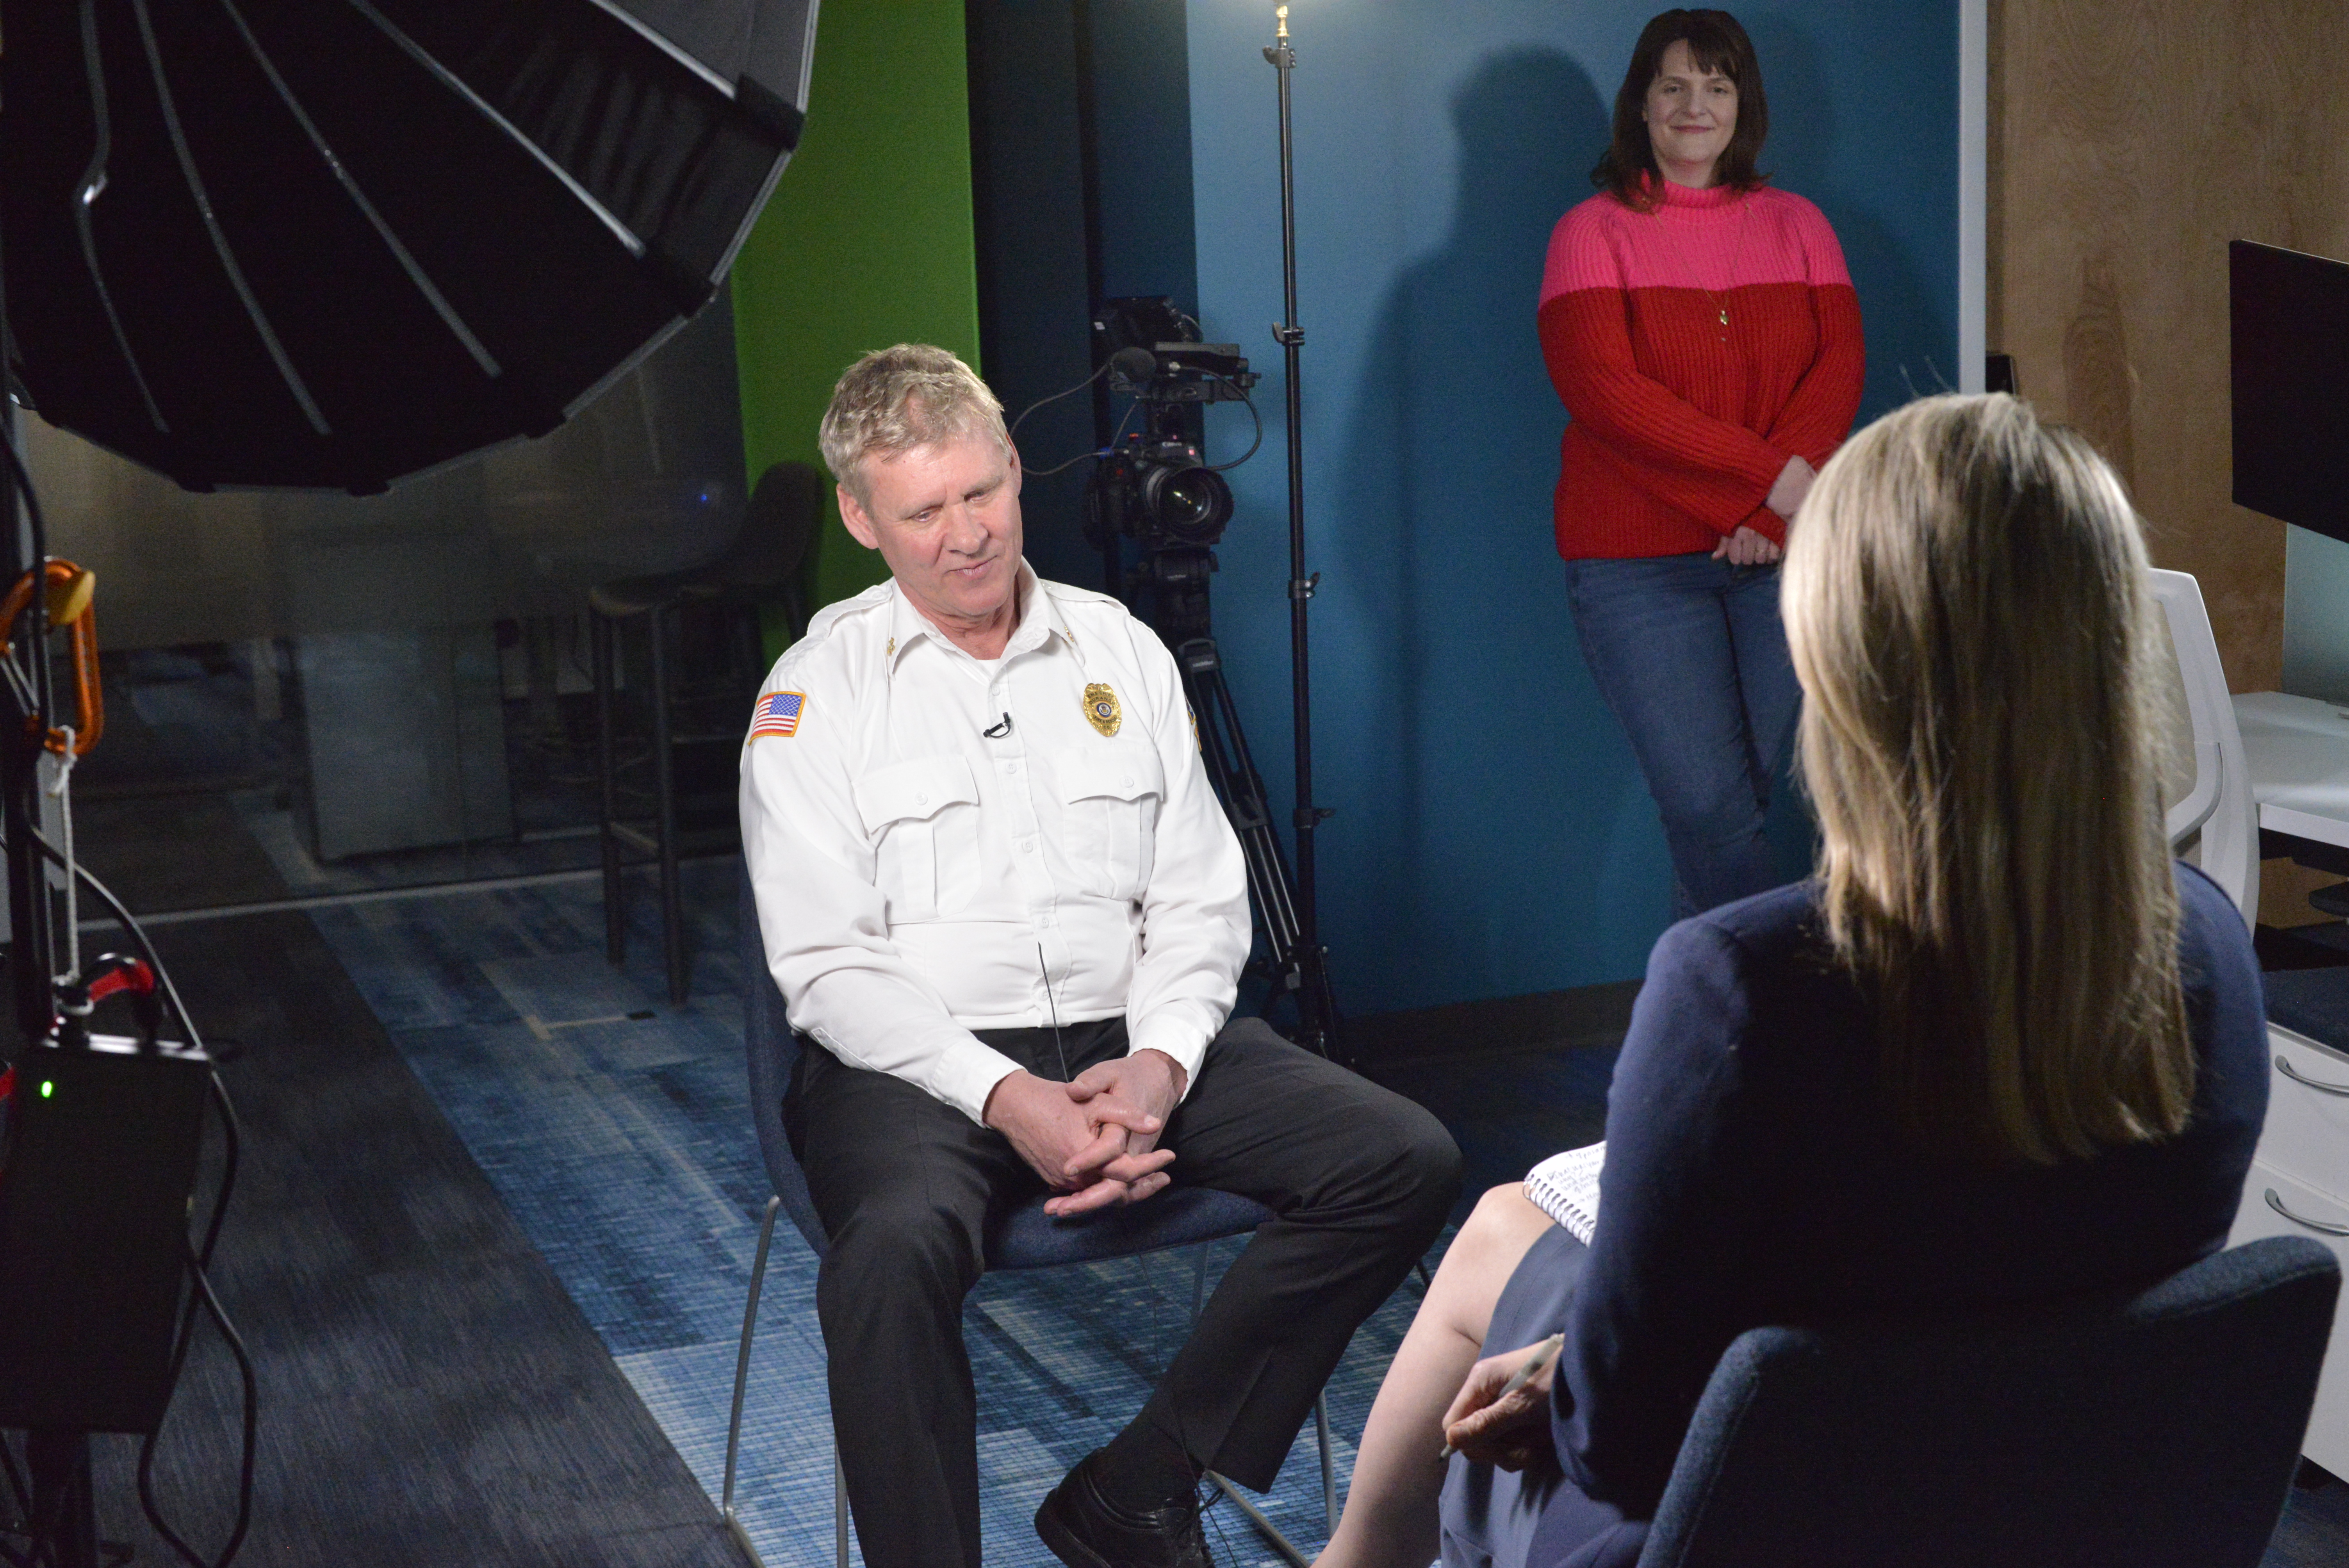 During EMS Day at the Capitol EMSAC President Scott Sholes was interview by Scripps News national investigative reporter Lori Jane Gliha for a report on EMS professionals criminally charged as a result of their patient care.